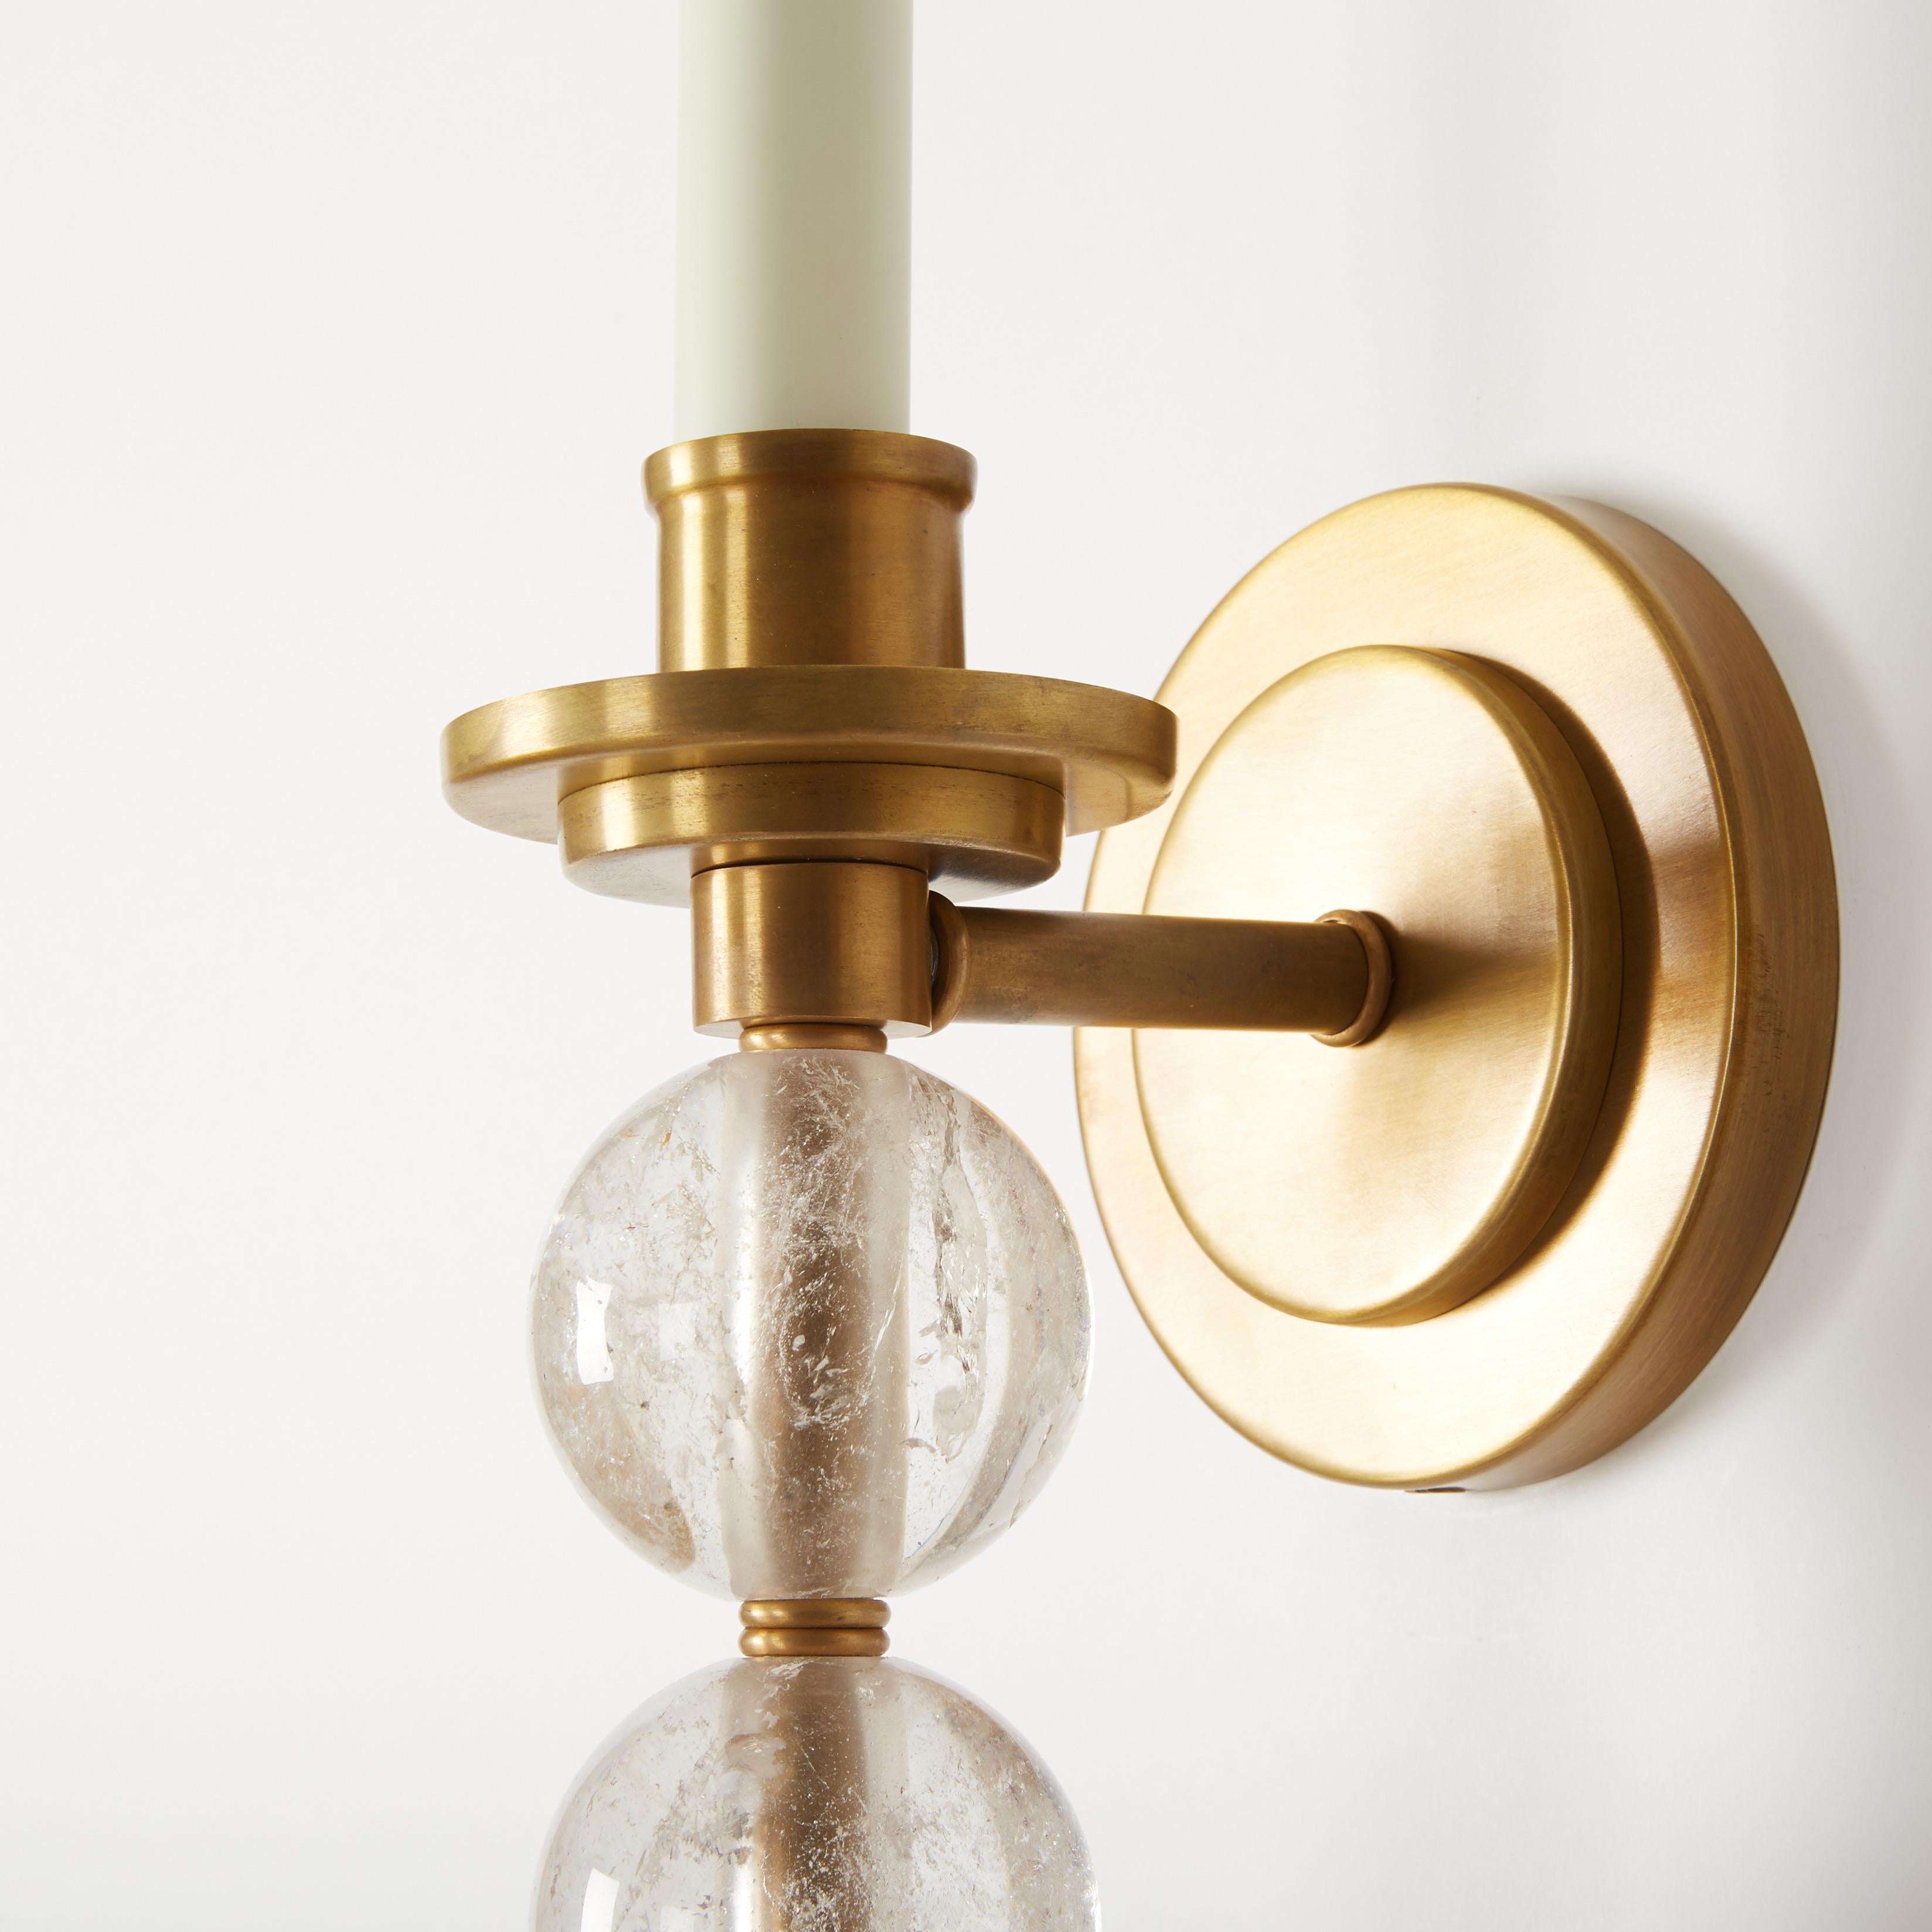 A pair of custom single-light Ephorus sconces with a satin brass finish and three graduated, hand carved rock crystal balls. These Transitional sconces are sold as a pair but can also be purchased individually. Each sconce has a medium Edison